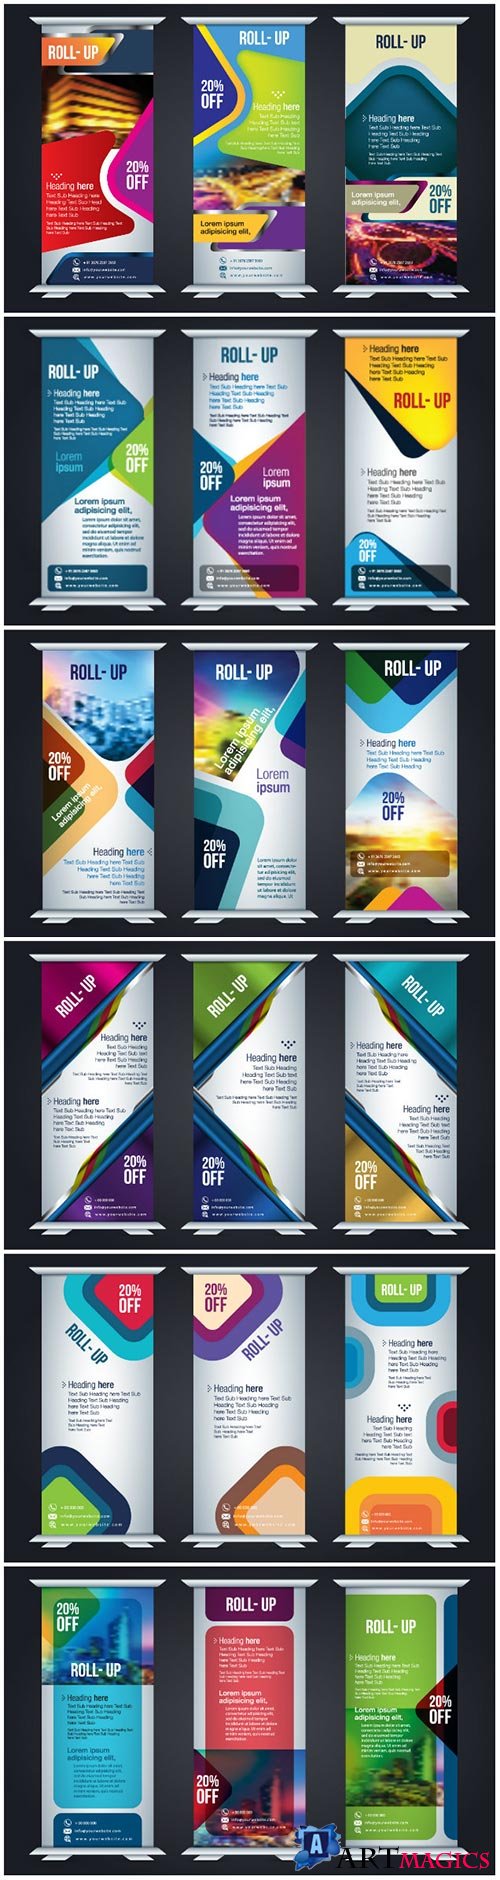 Vertical roll up design template for corporate business